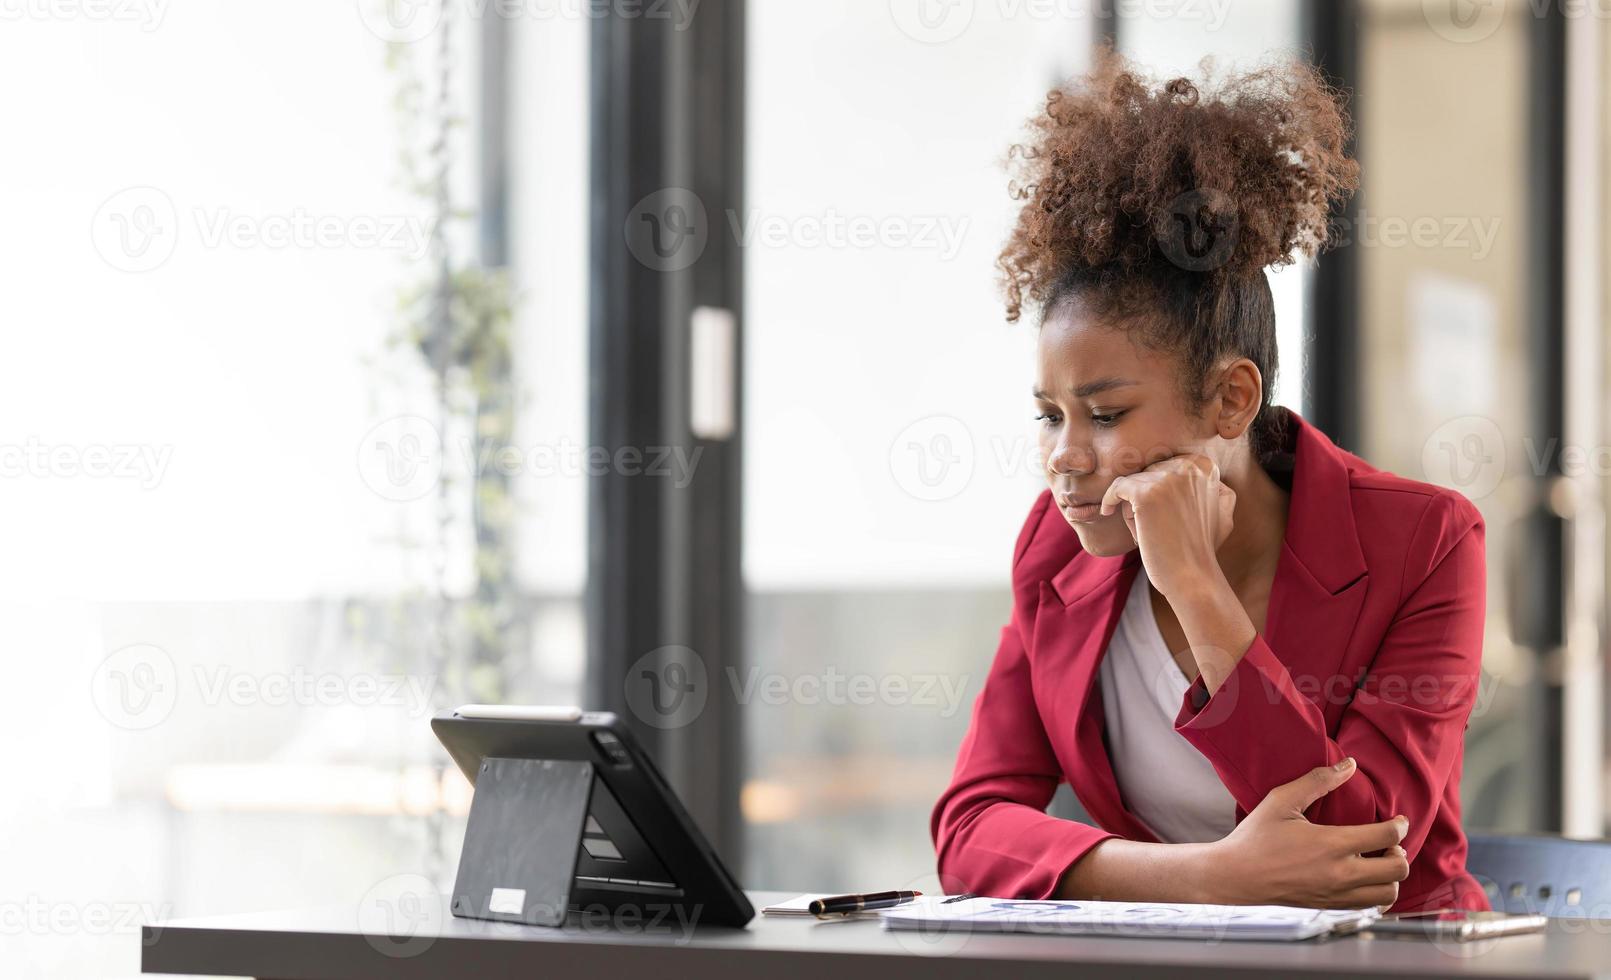 Frustrated annoyed woman confused by computer problem, annoyed businesswoman feels indignant about laptop crash, bad news online or disgusting video on web, stressed student looking at broken laptop photo